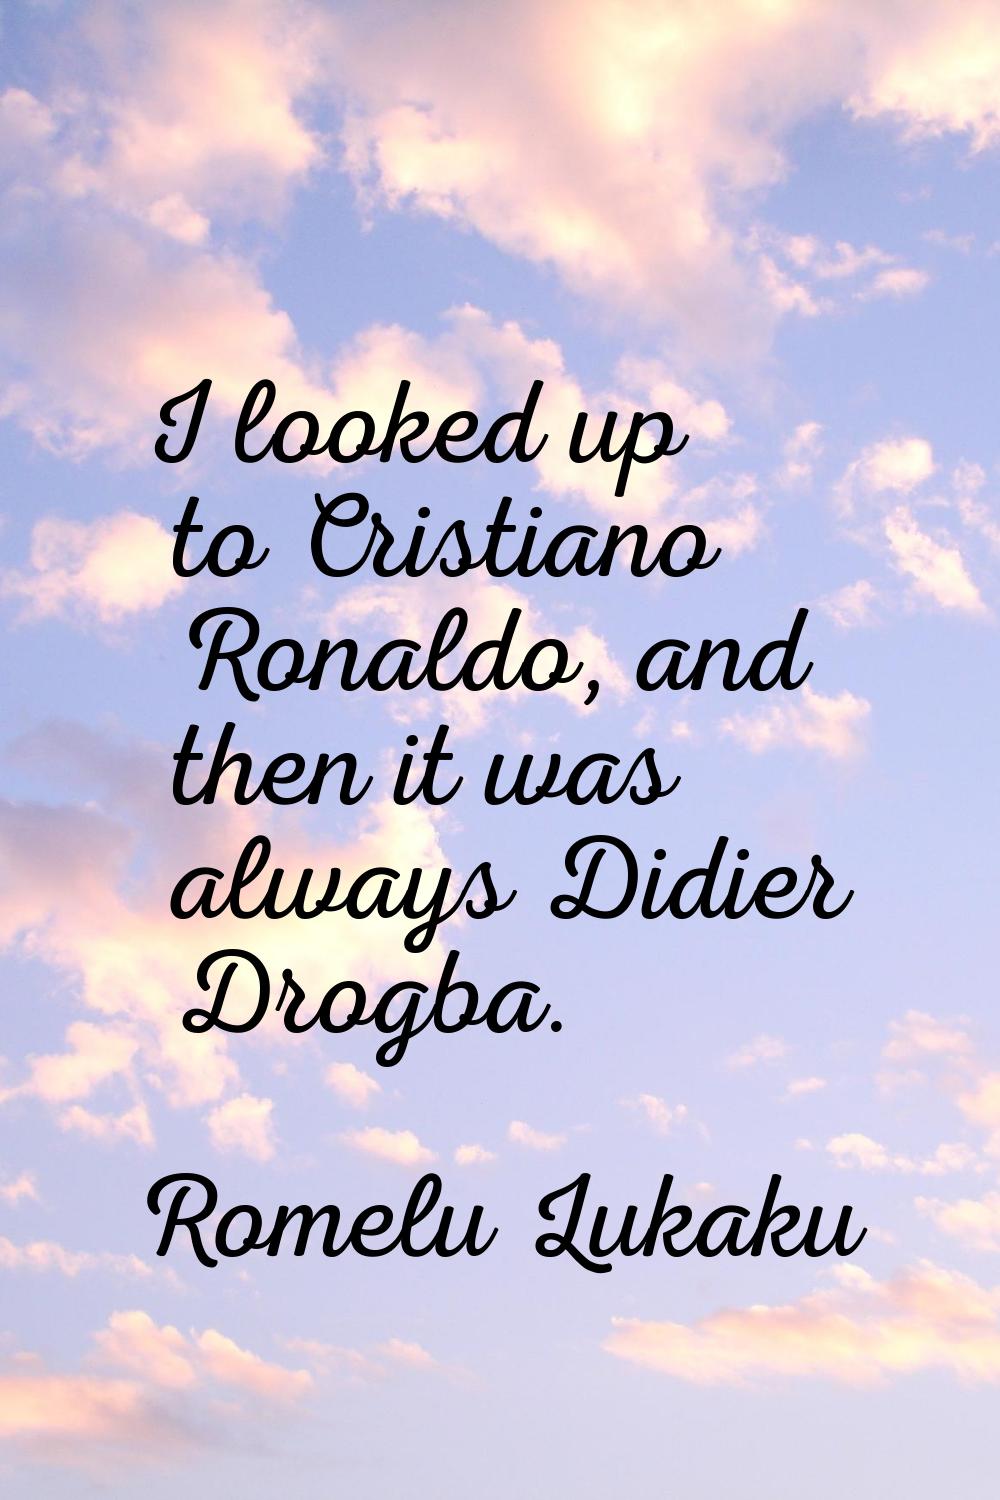 I looked up to Cristiano Ronaldo, and then it was always Didier Drogba.